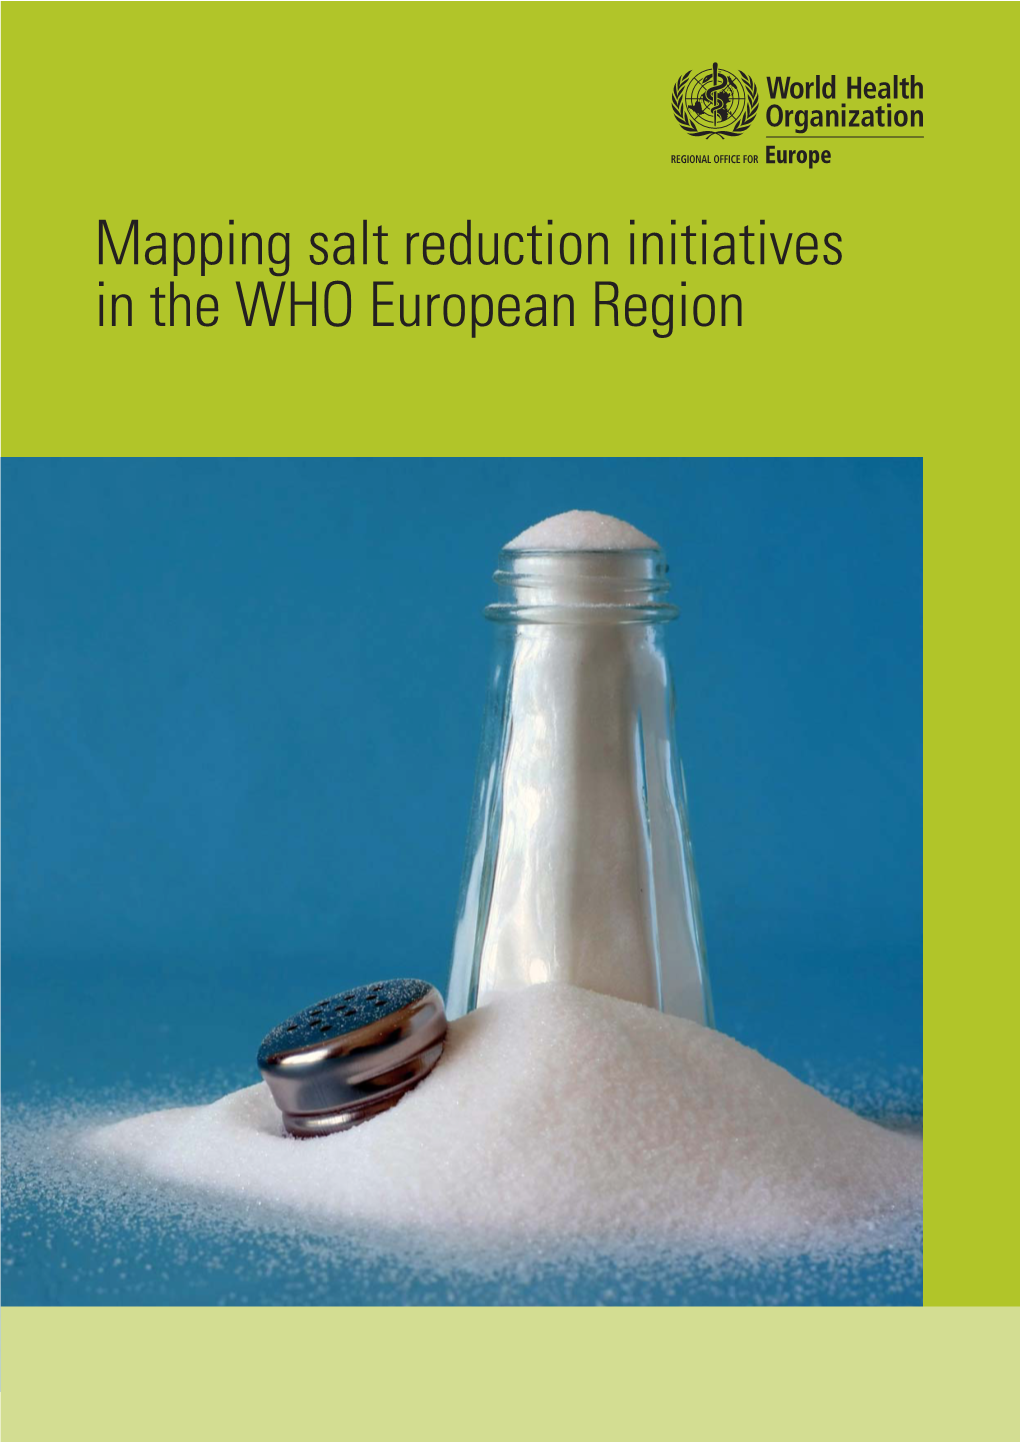 Mapping Salt Reduction Initiatives in the WHO European Region Final